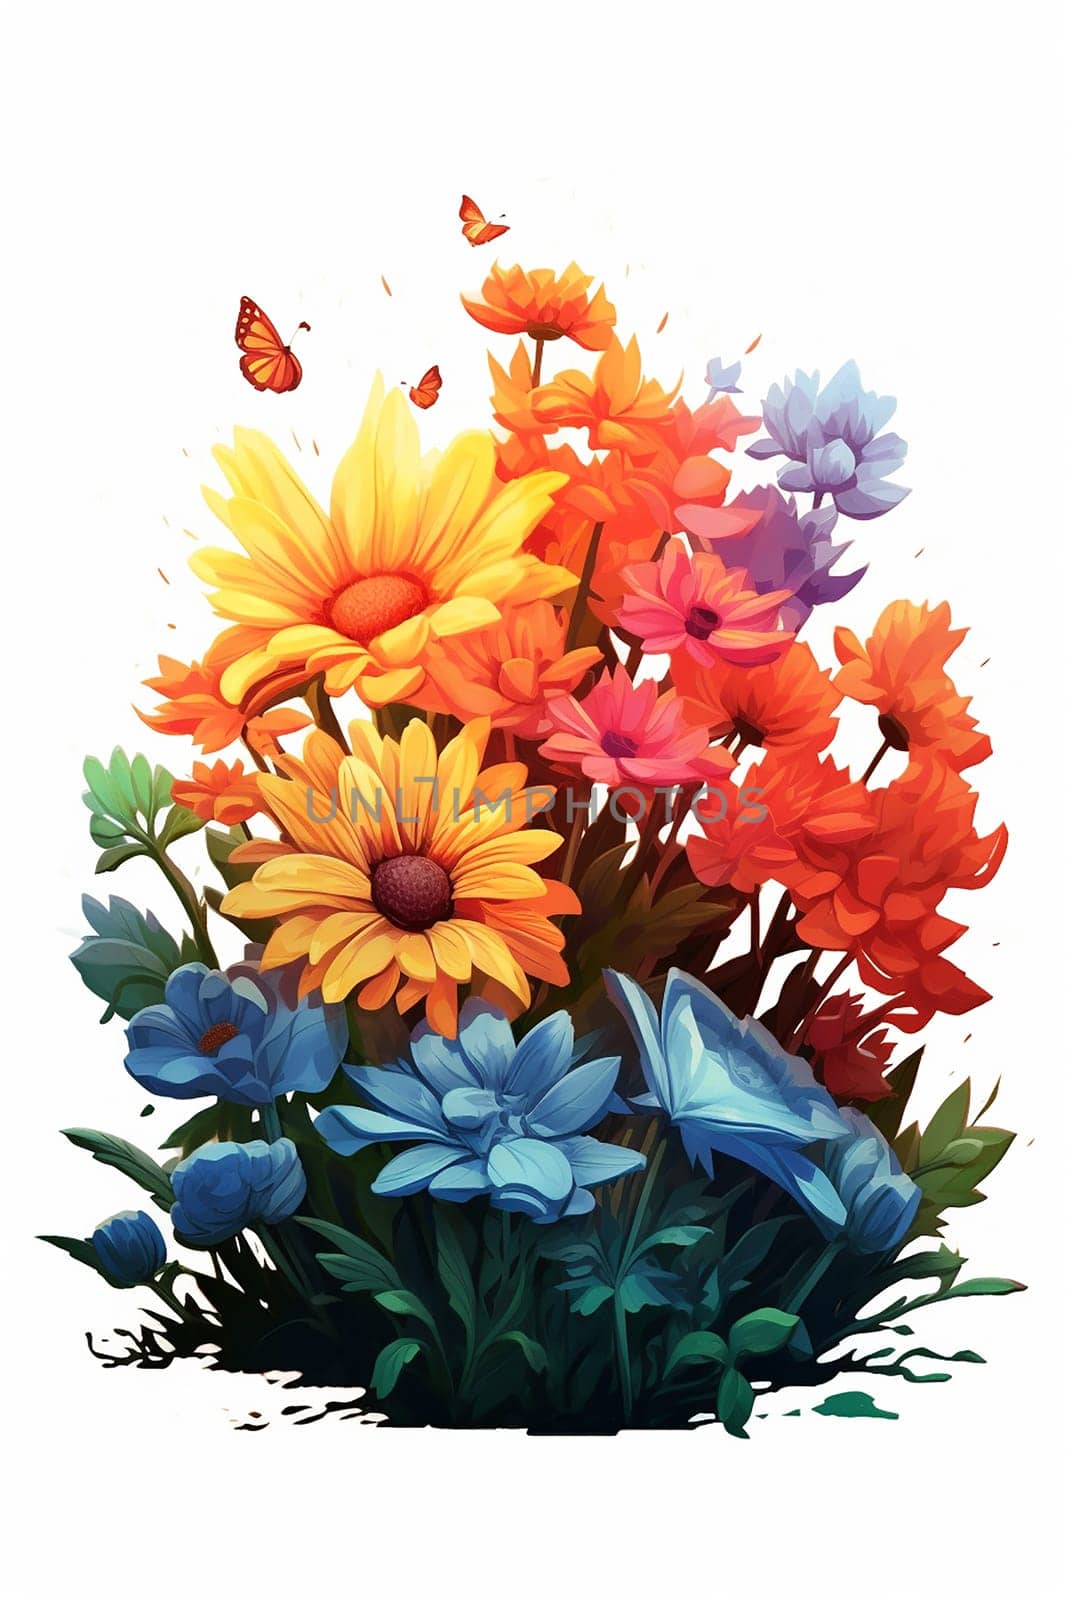 Vibrant illustration of various colorful flowers with a butterfly. by Hype2art